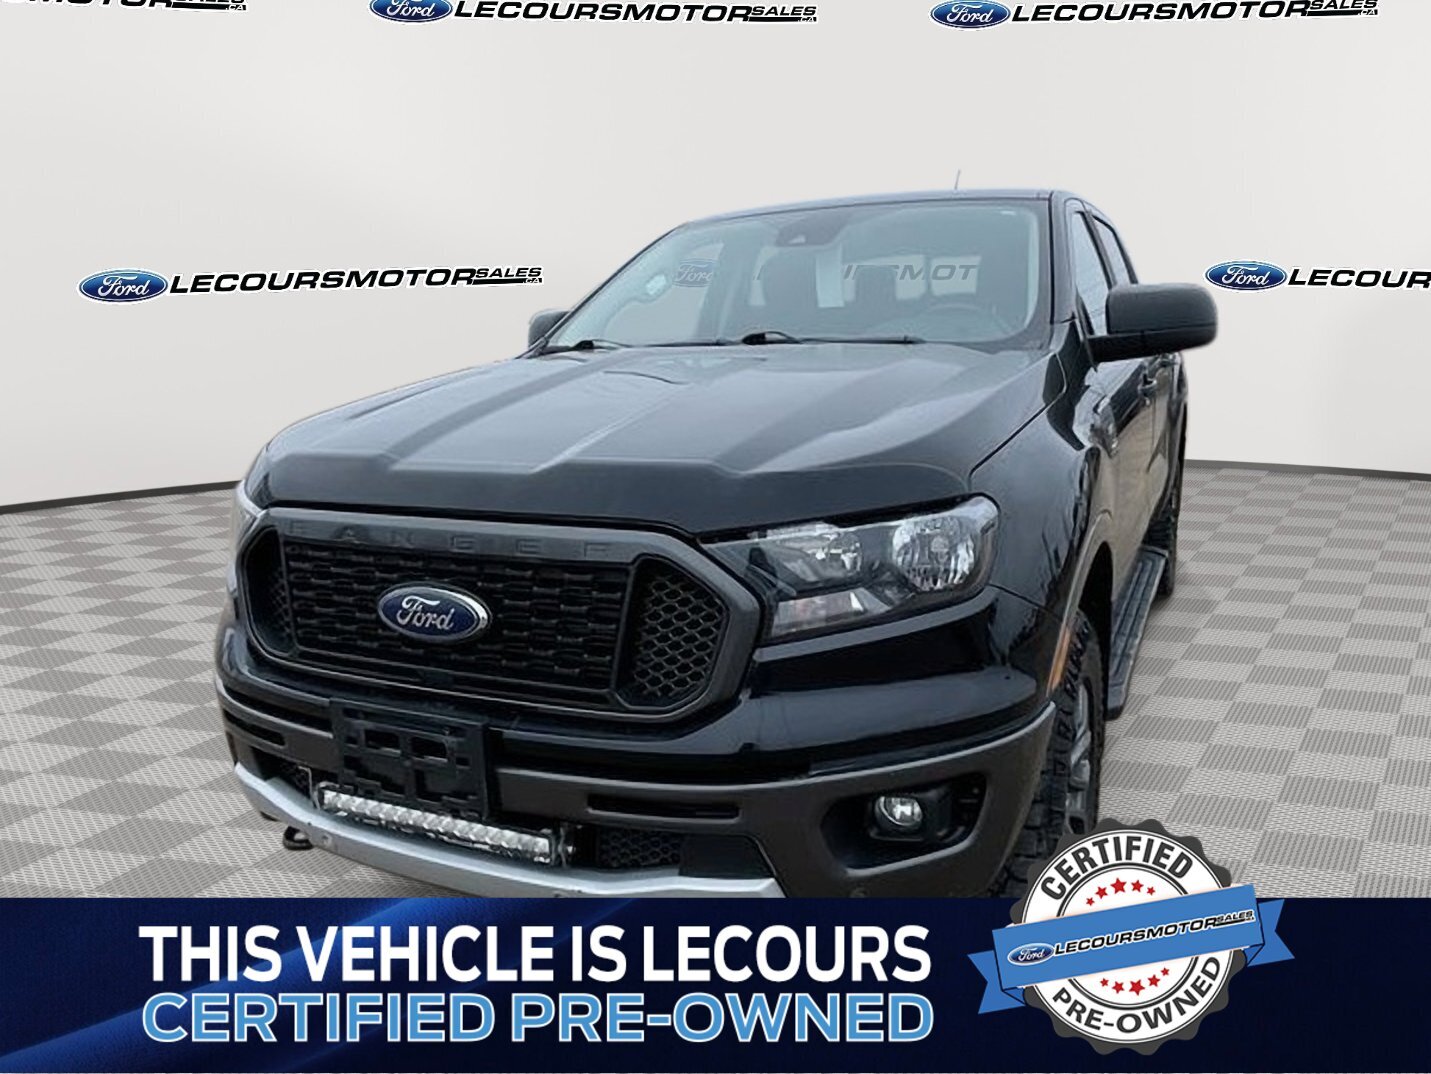 2019 Ford Ranger 2.3L EcoBoost | VERY CLEAN | HEATED SEATS